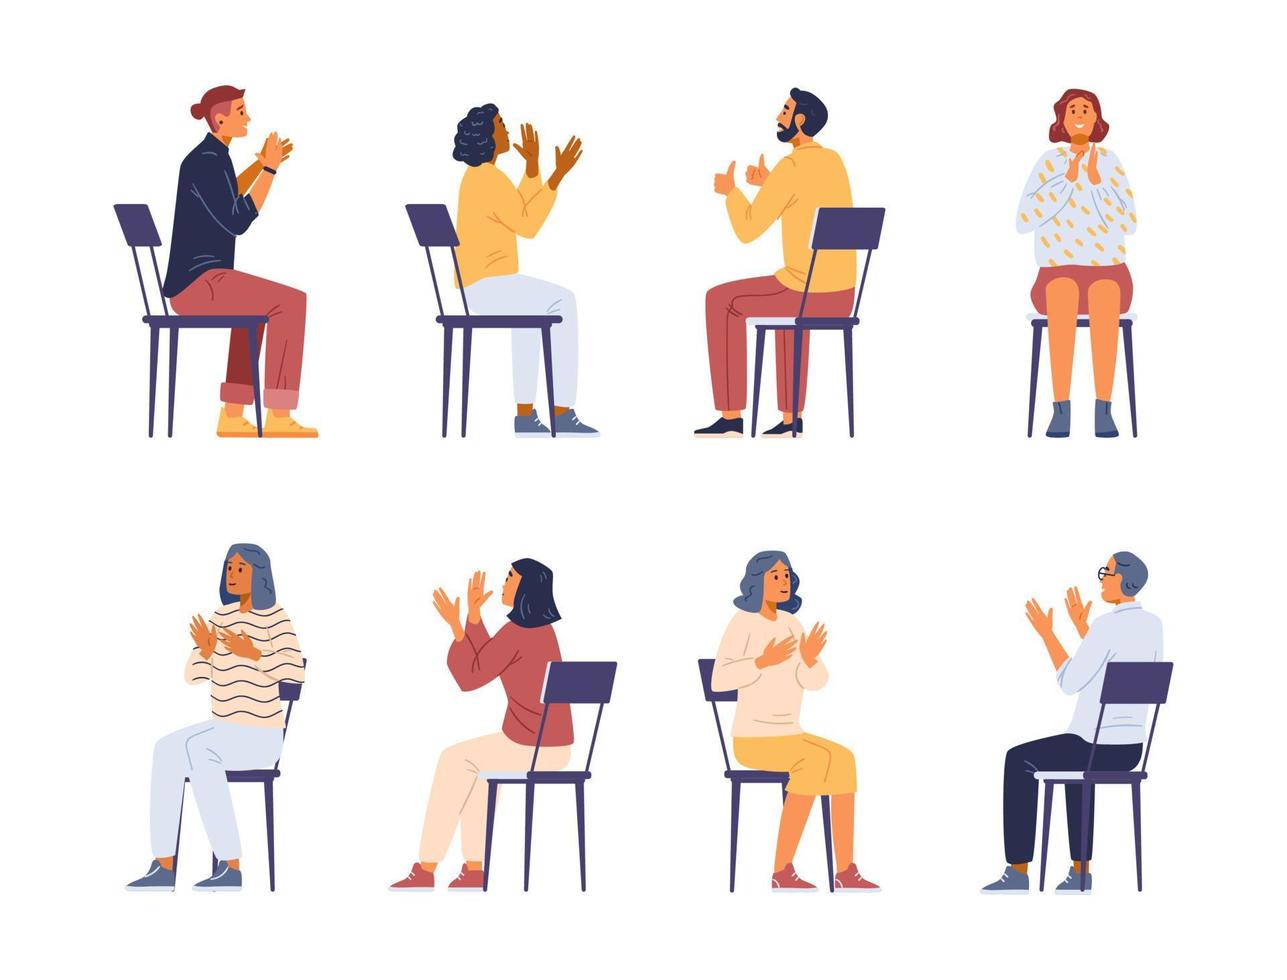 Different people applauding sitting on chairs flat vector illustrations set.